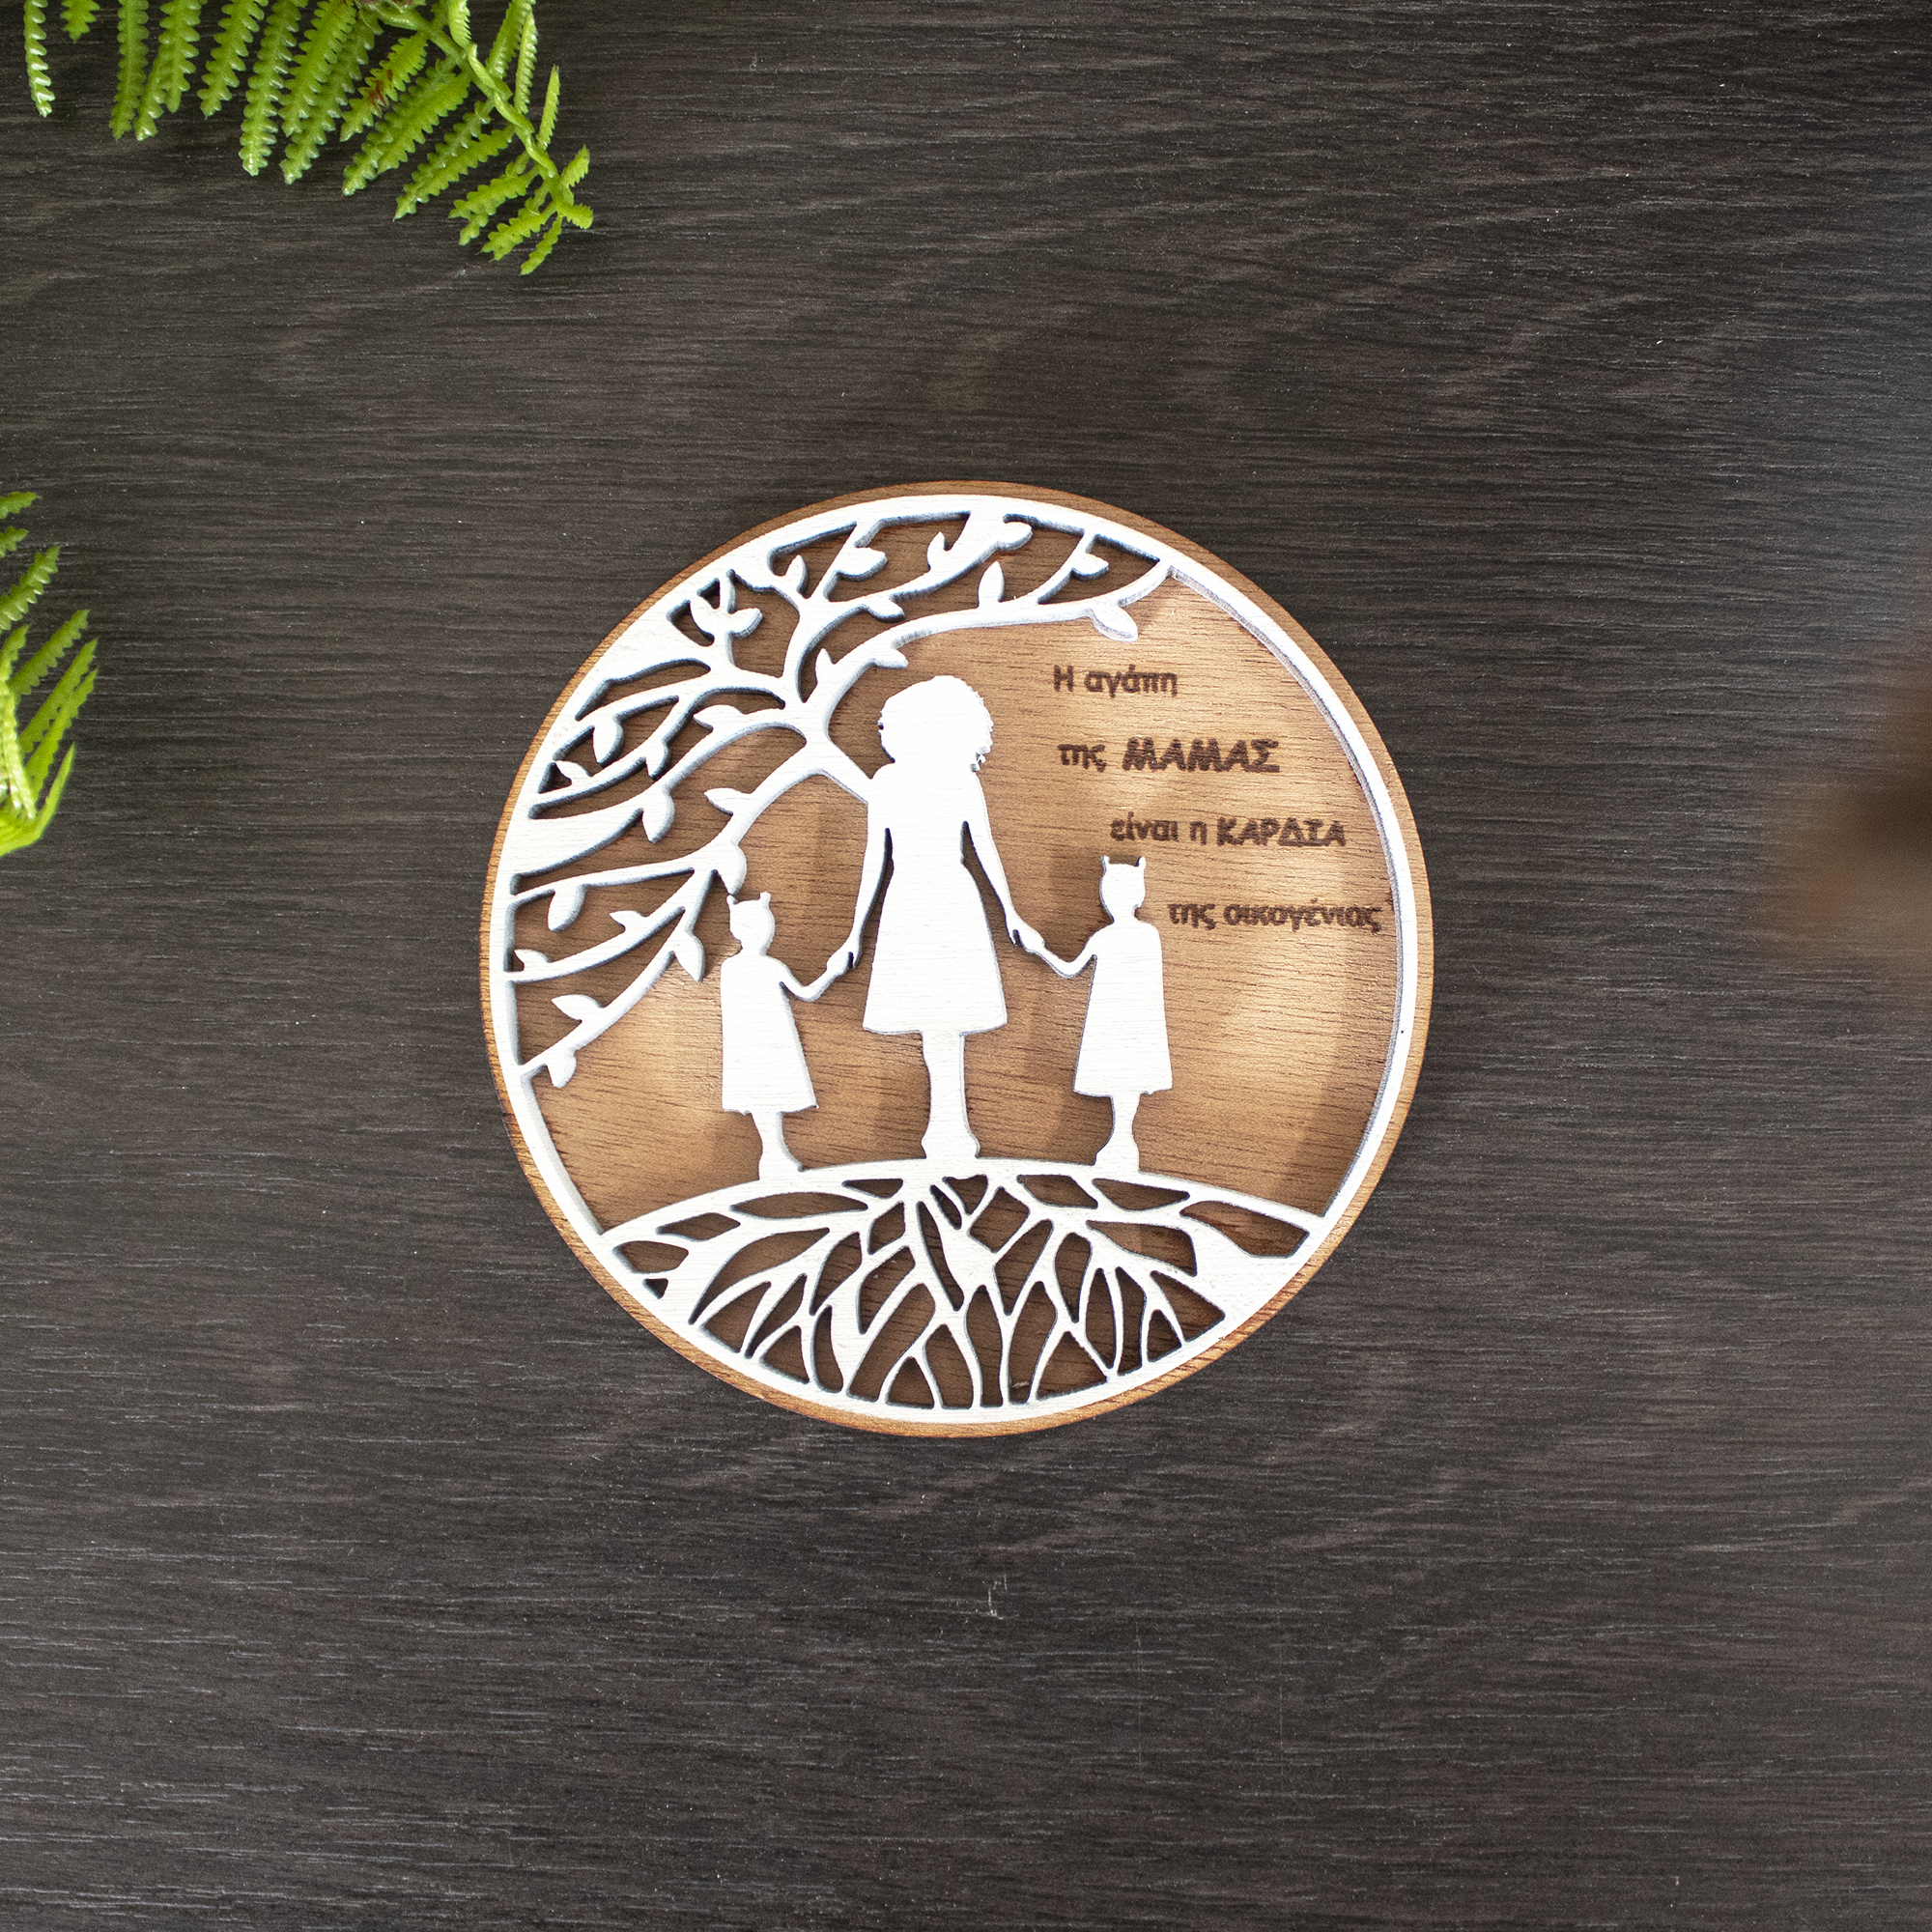 Mother's Gift Fridge Magnet made of high-quality wood with heart-shaped design.